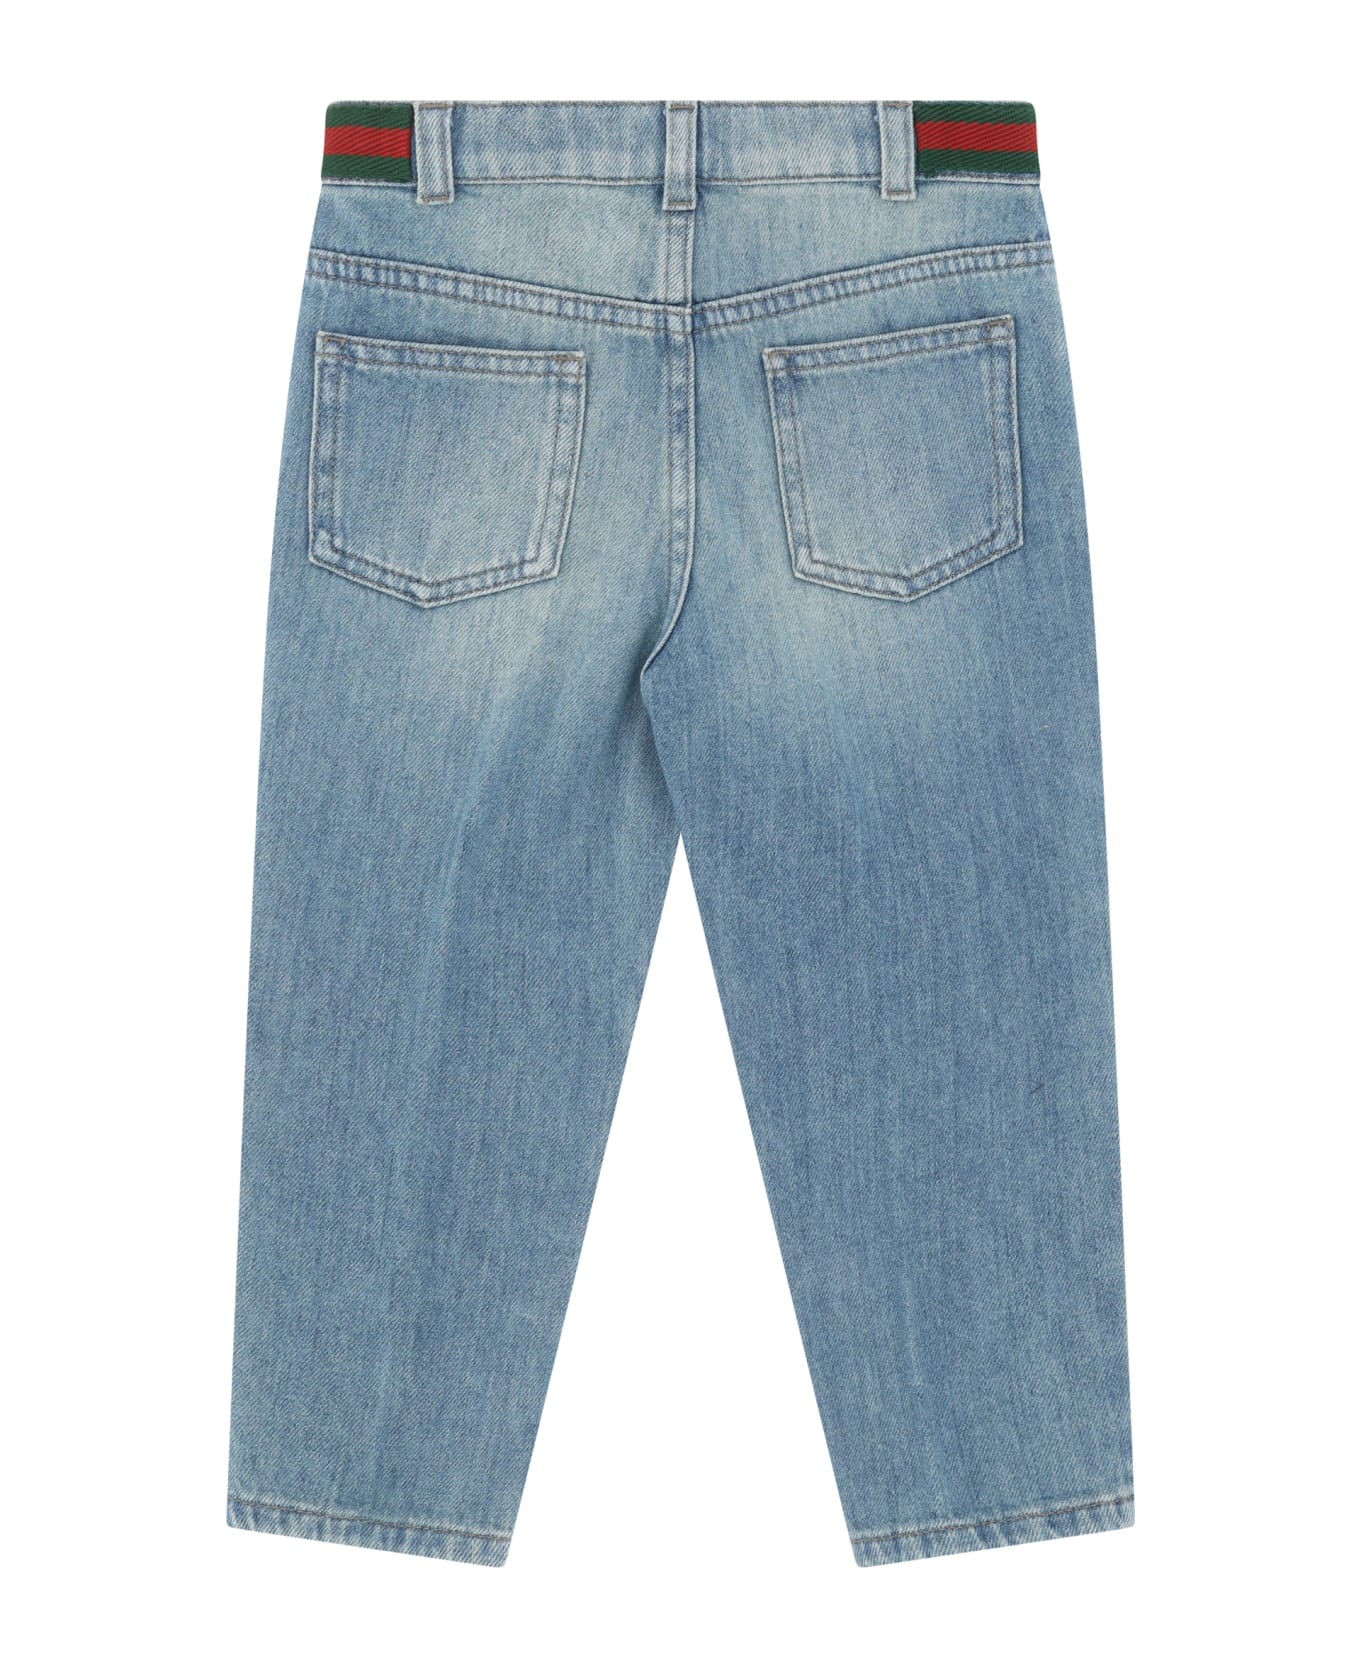 Gucci Jeans For Boy - Blue